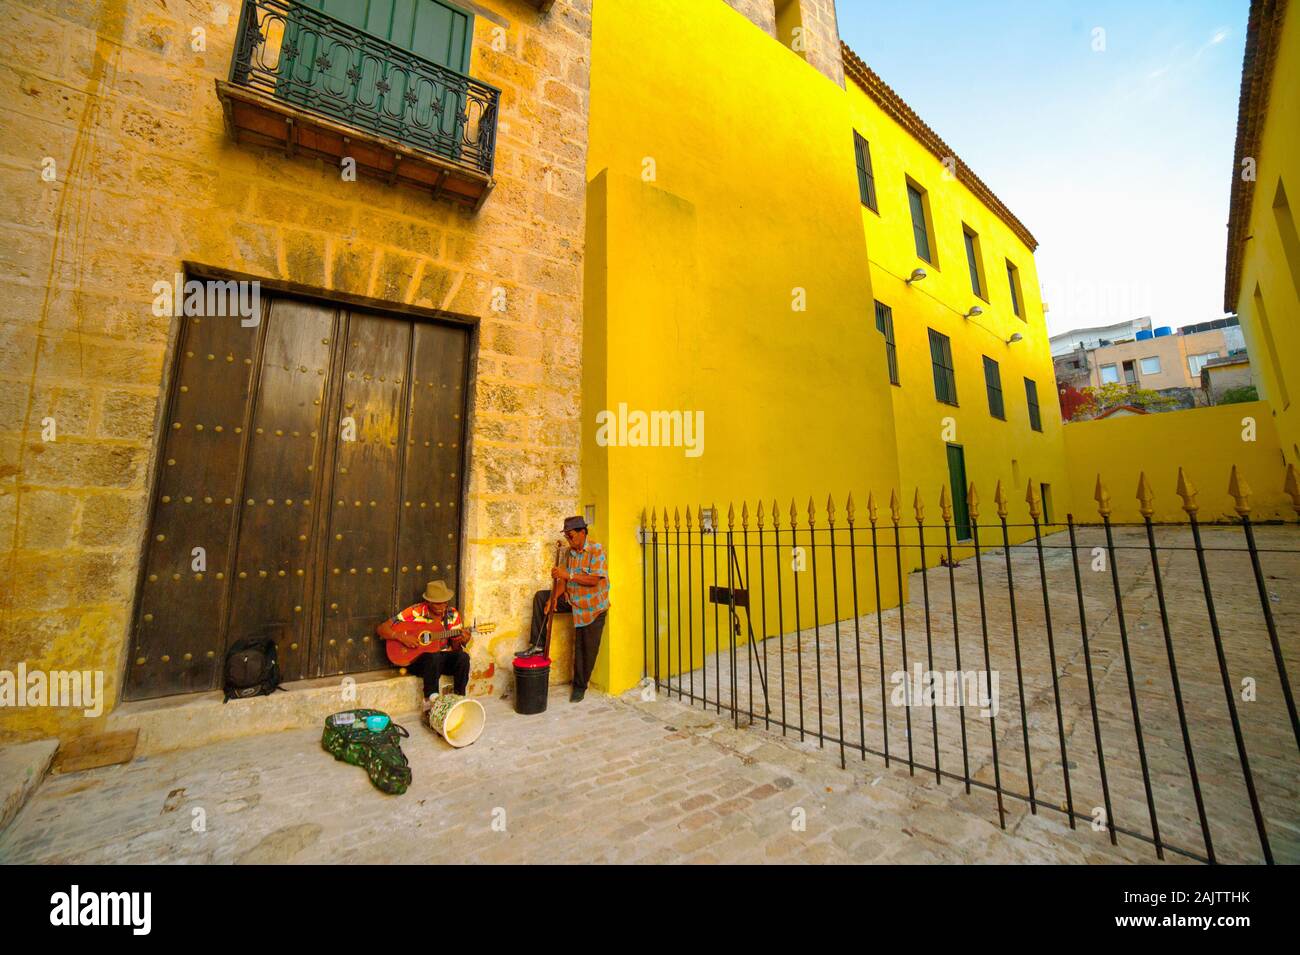 Two musicians perform beside a yellow wall in Havana, Cuba Stock Photo